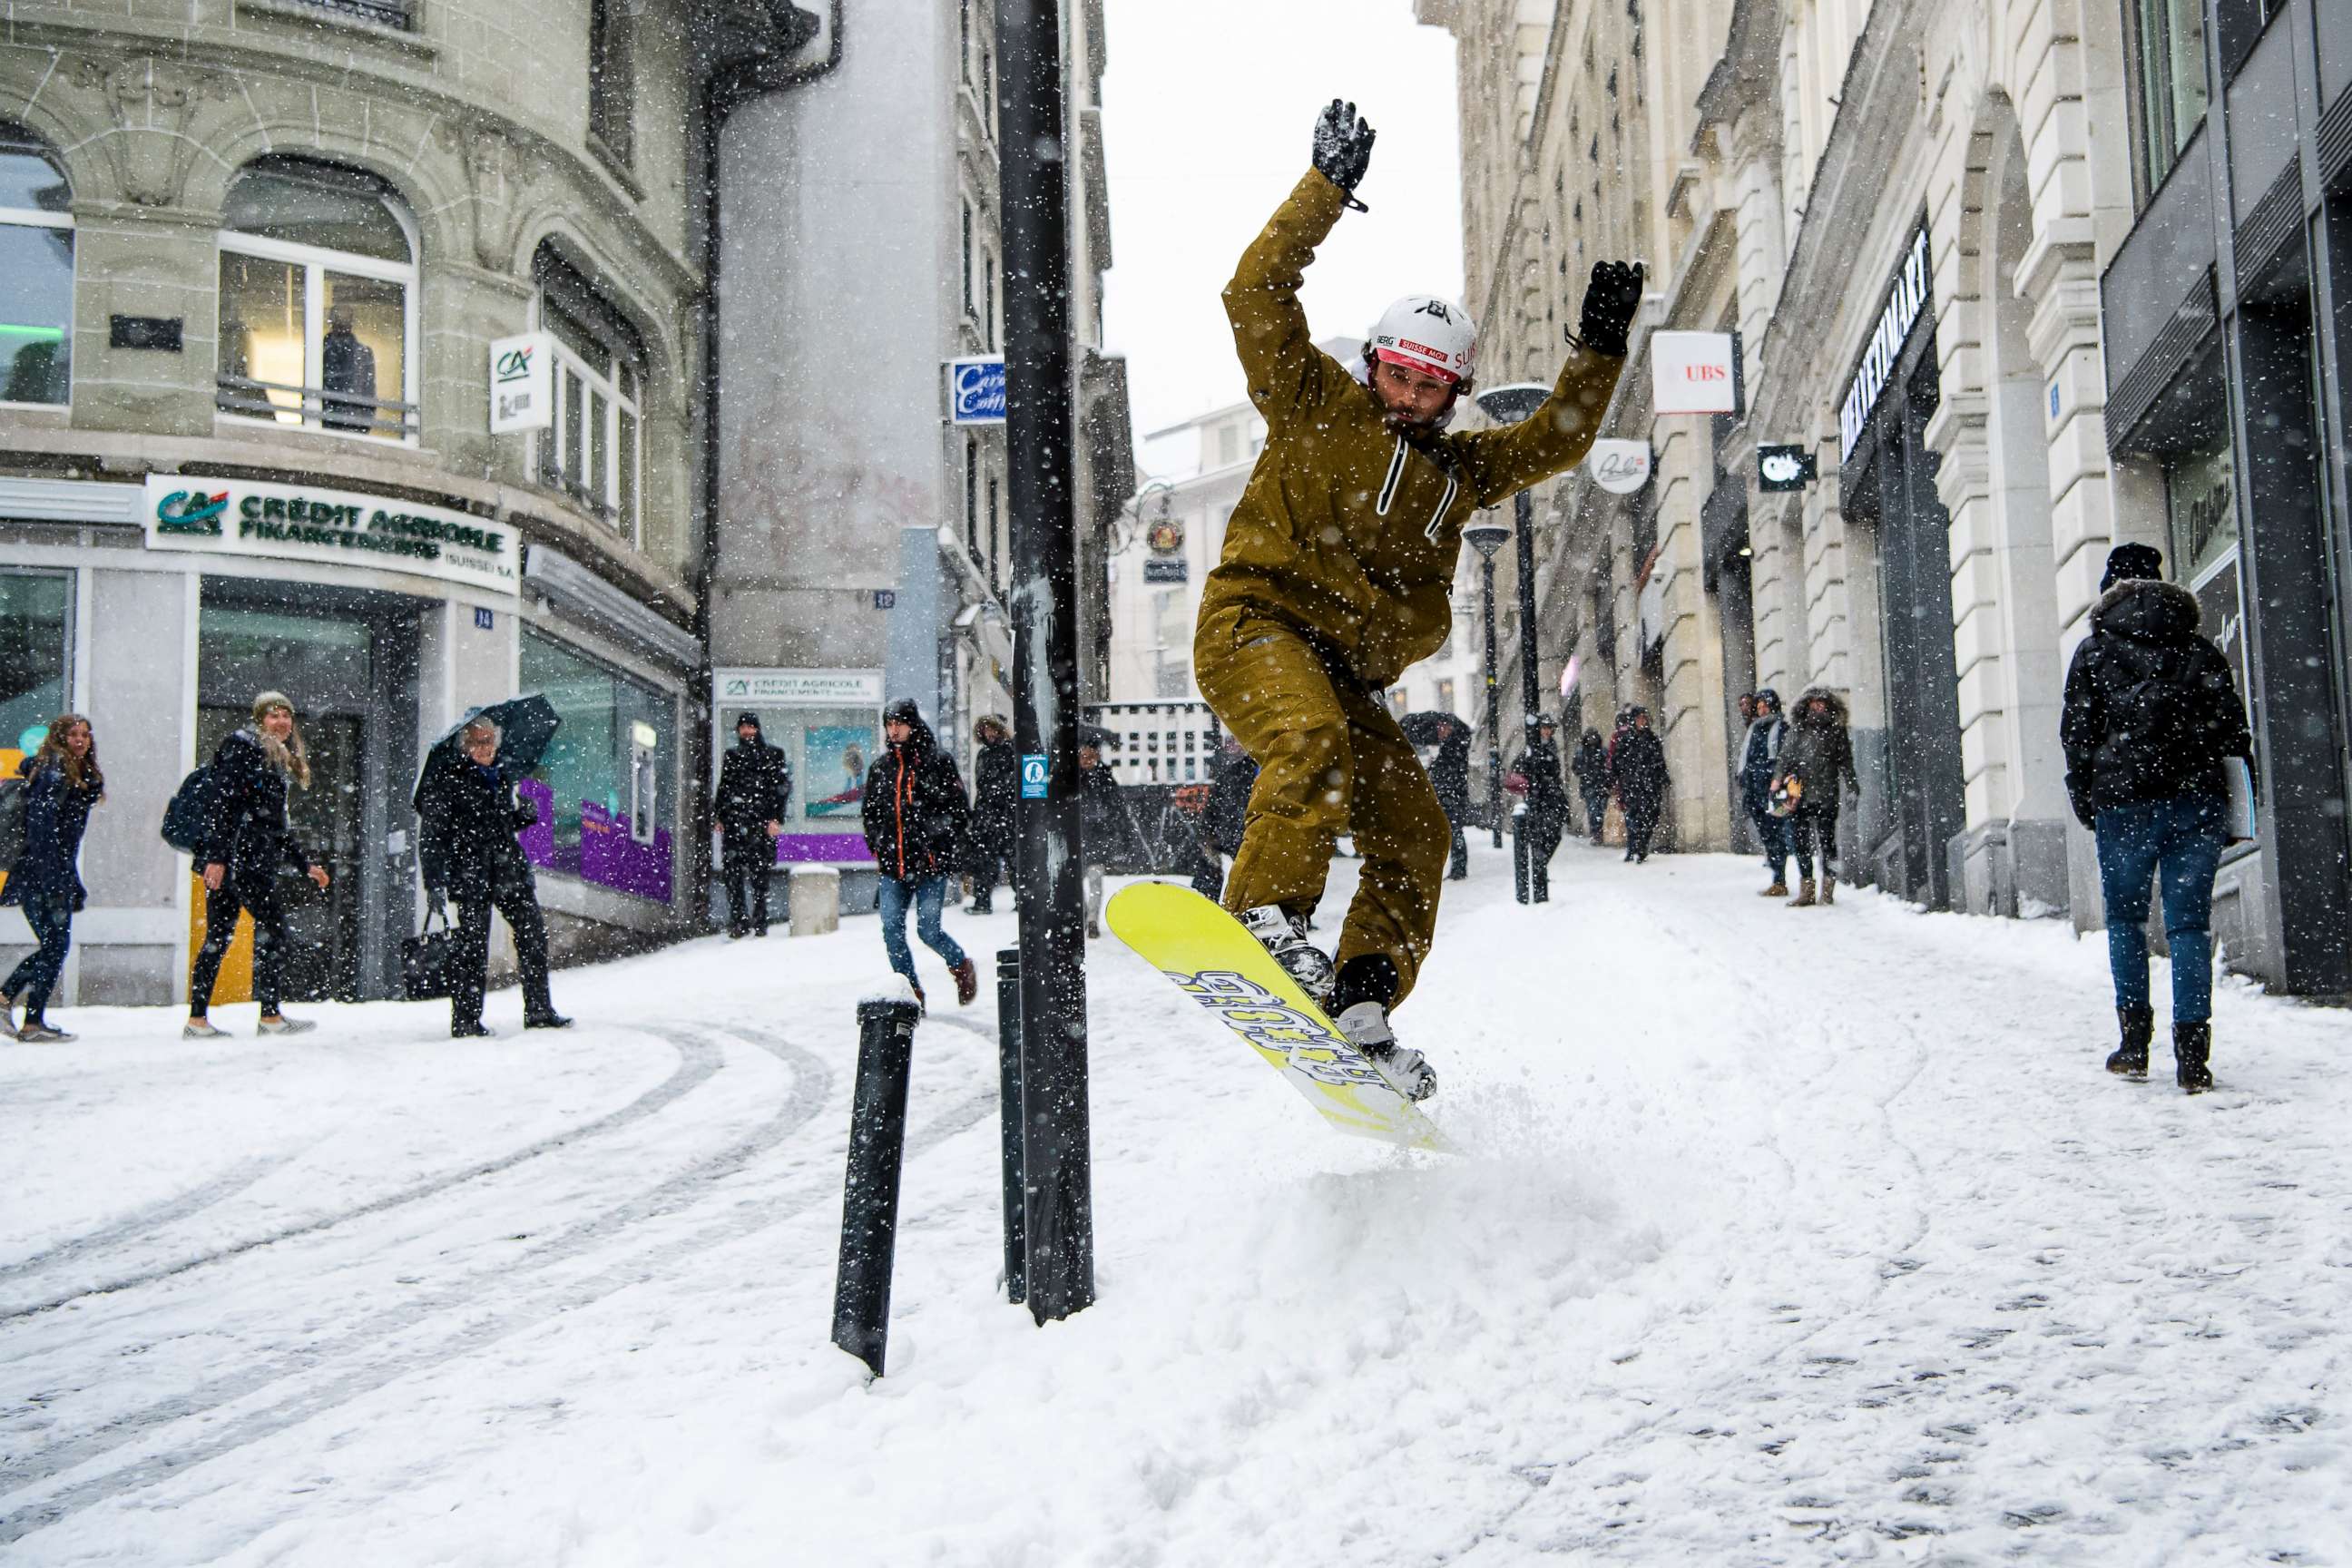 PHOTO: Sylvain rides his snowboard on a snow-covered street during a snowfall in Lausanne, Switzerland, March 1, 2018.